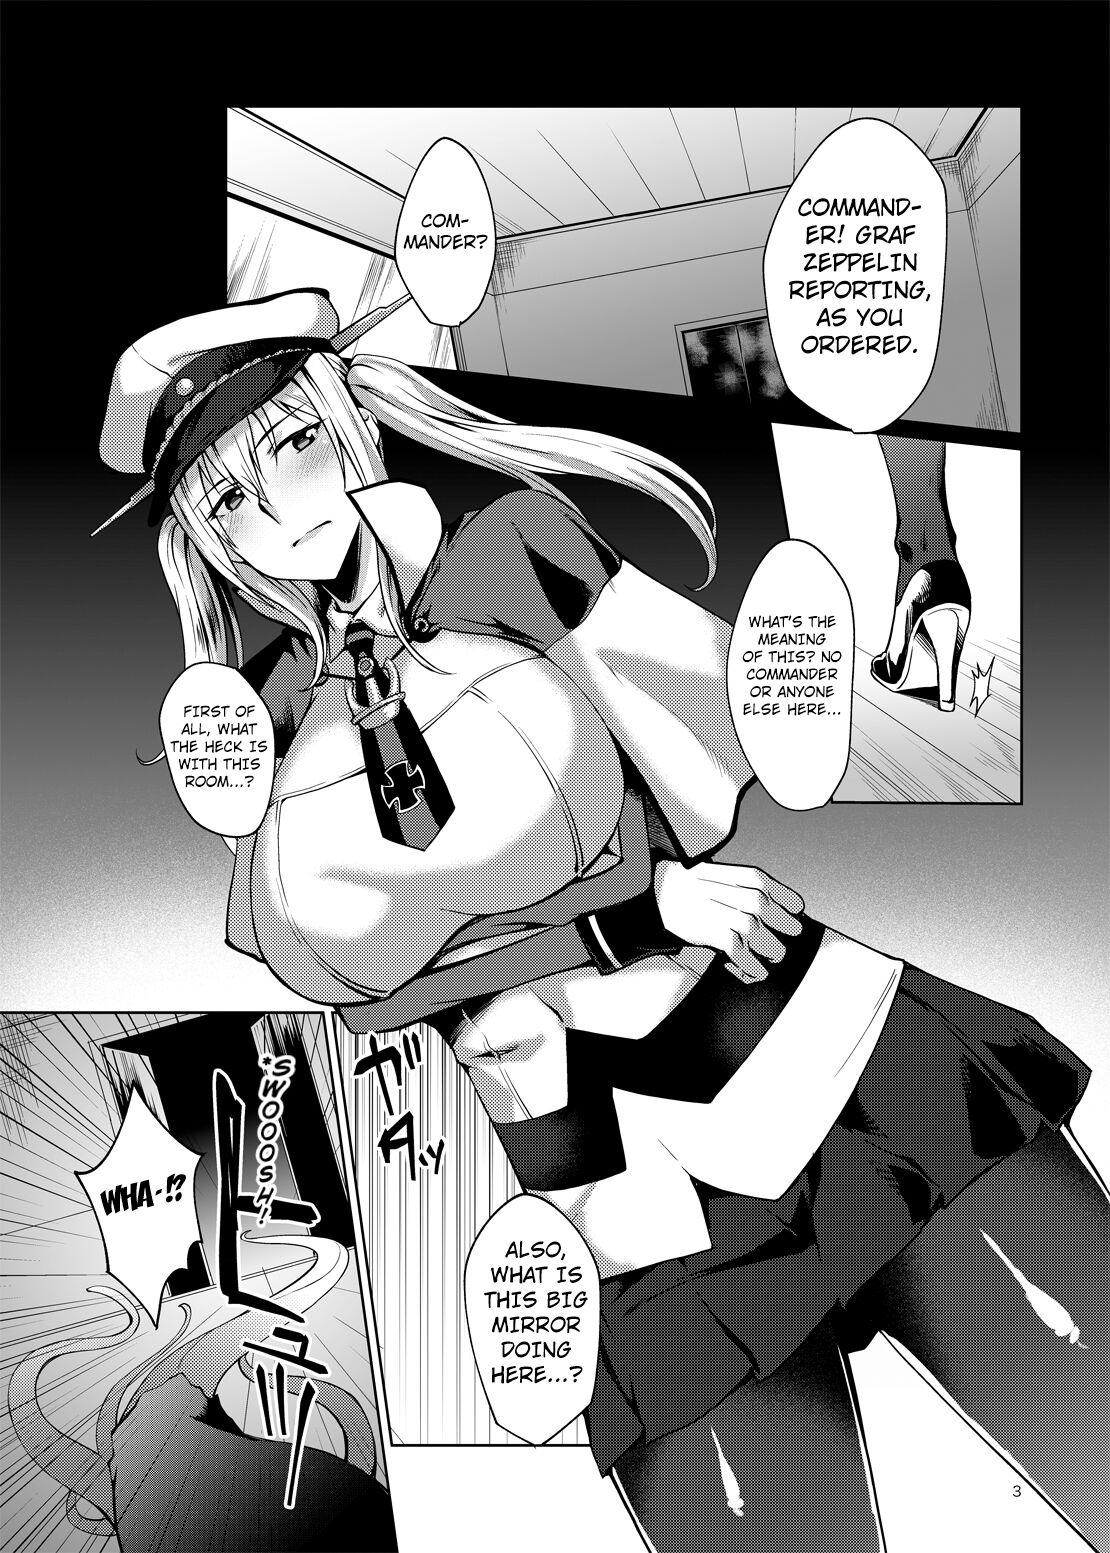 Swingers Sawa Graf Zeppelin - Kantai collection Riding Cock - Page 2